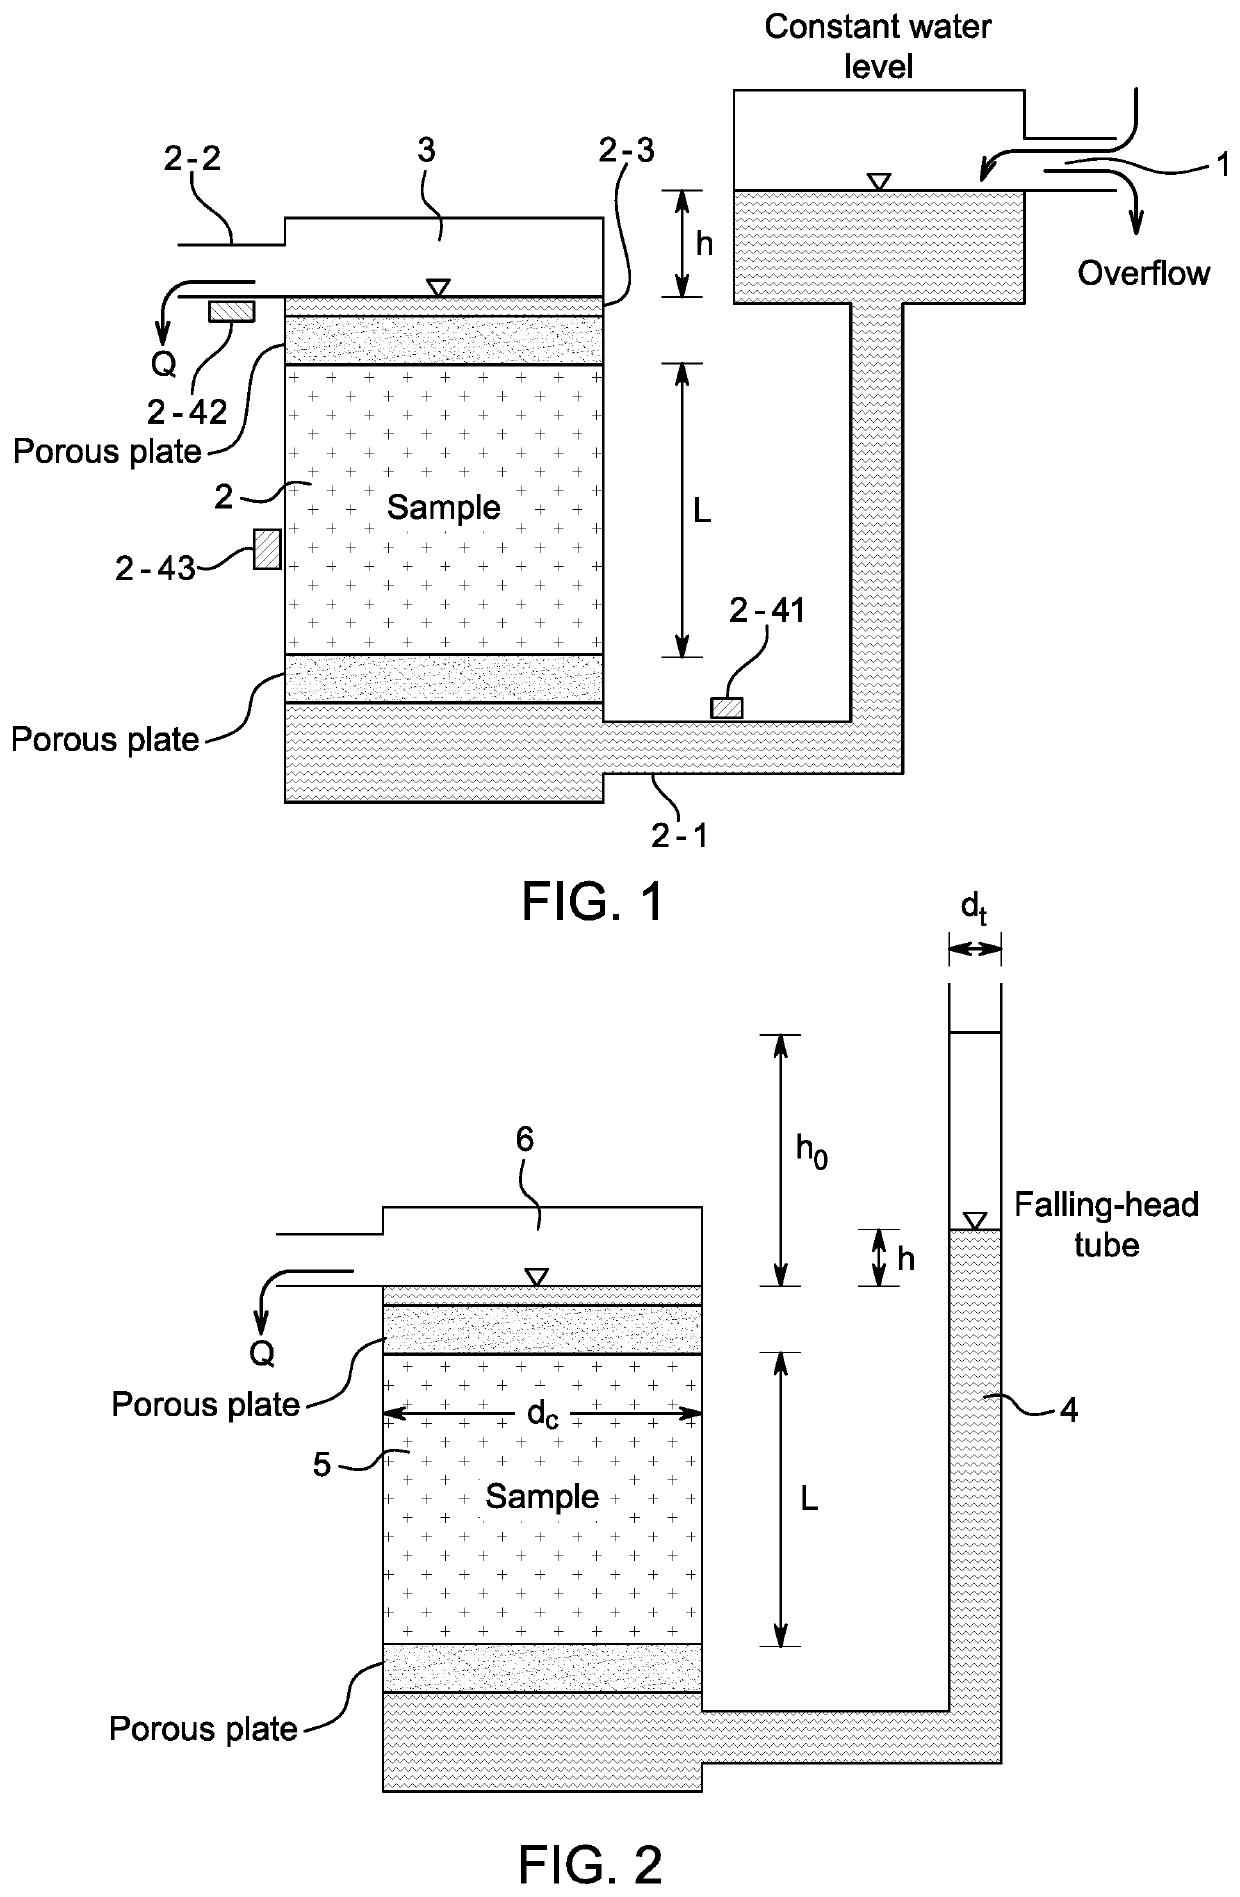 Hydraulic confinement and measuring system for determining hydraulic conductivity of porous carbonates and sandstones